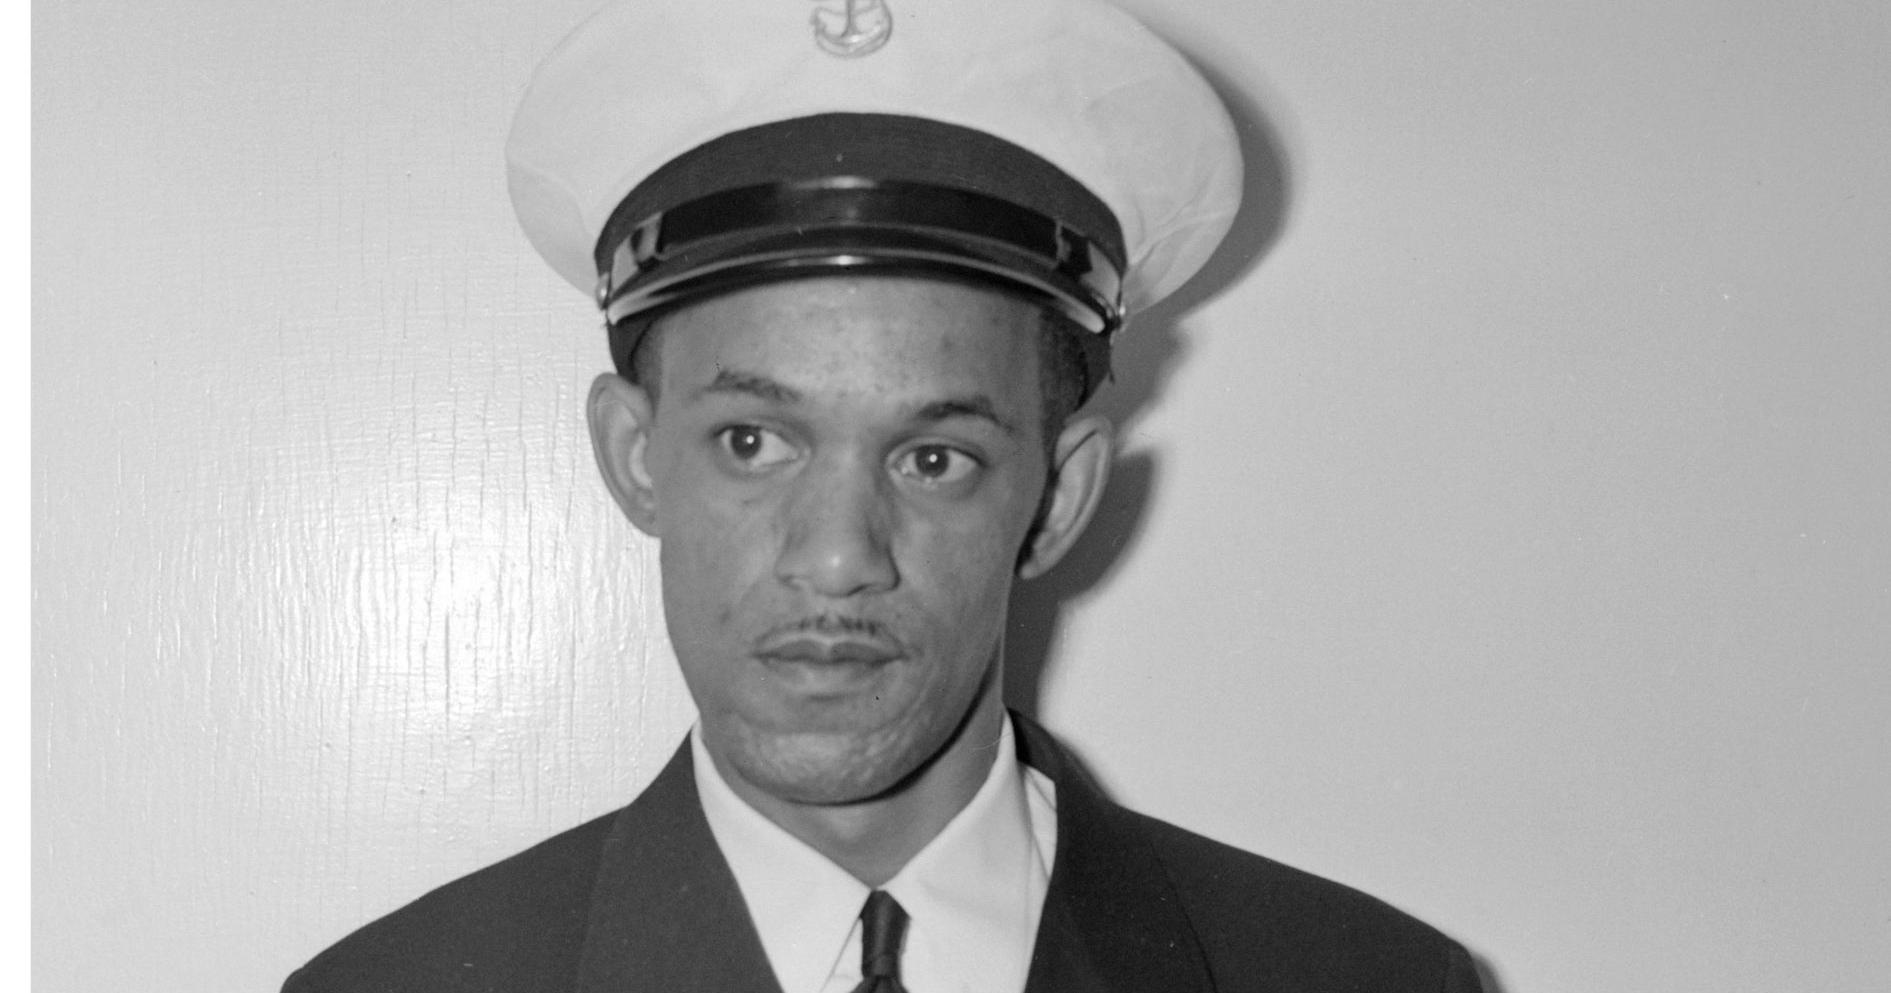 Smith a vet, pilot, NAACP leader and ‘hidden’ figure in Bloomington history